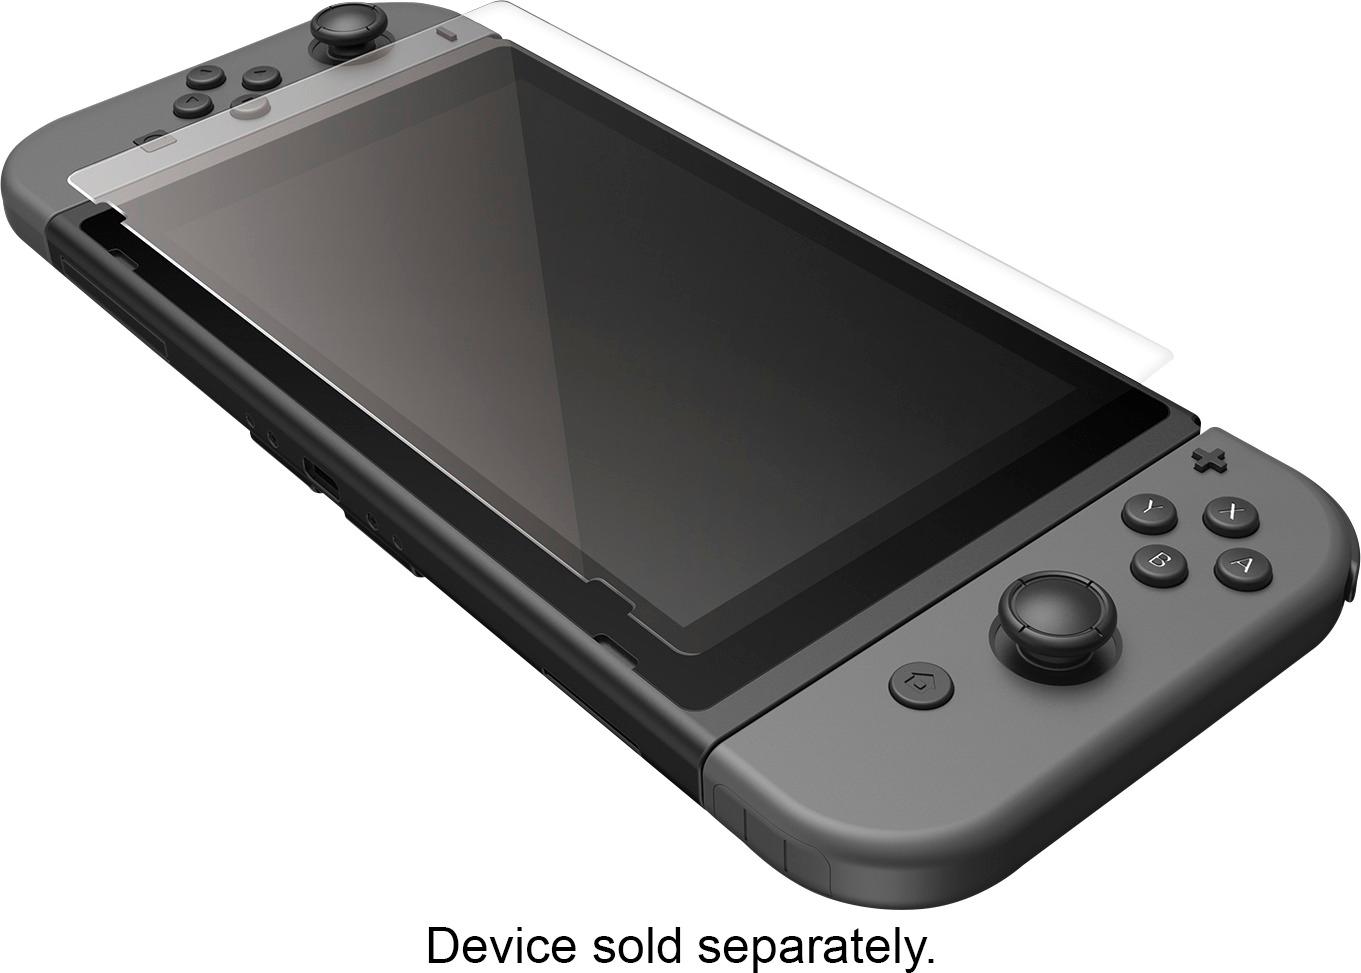 nintendo switch clear cover